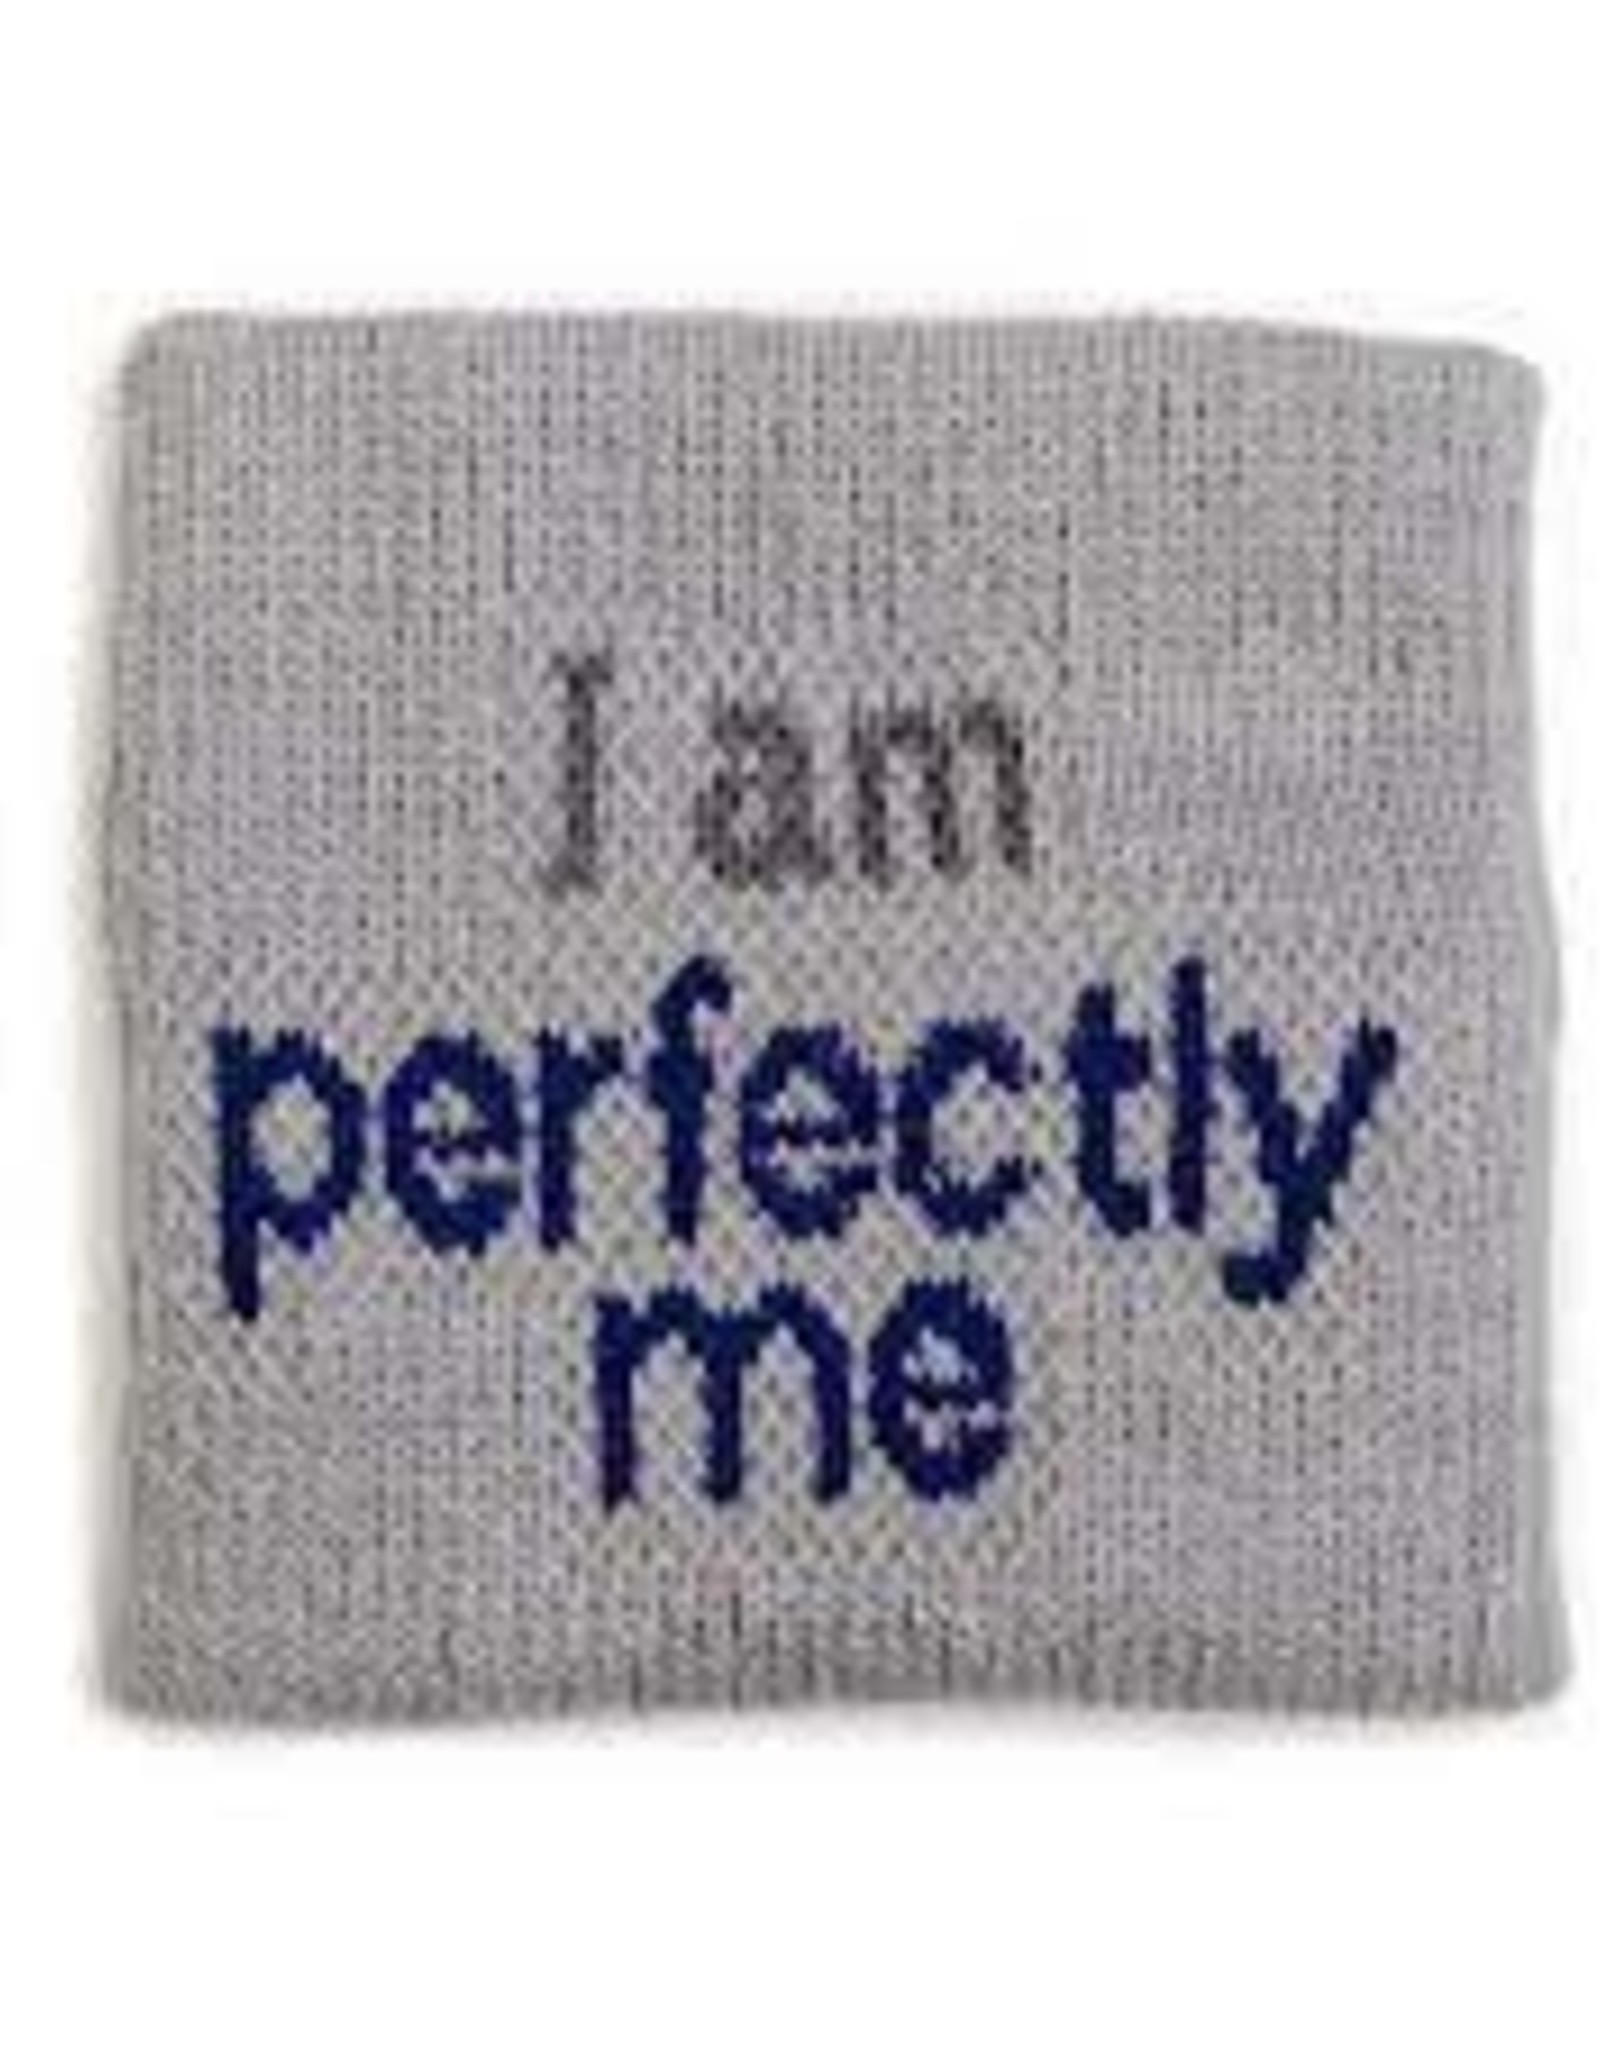 Apparel Bargain Barn - Notes to Self: I am Perfectly Me Wrist Band Grey/Purple